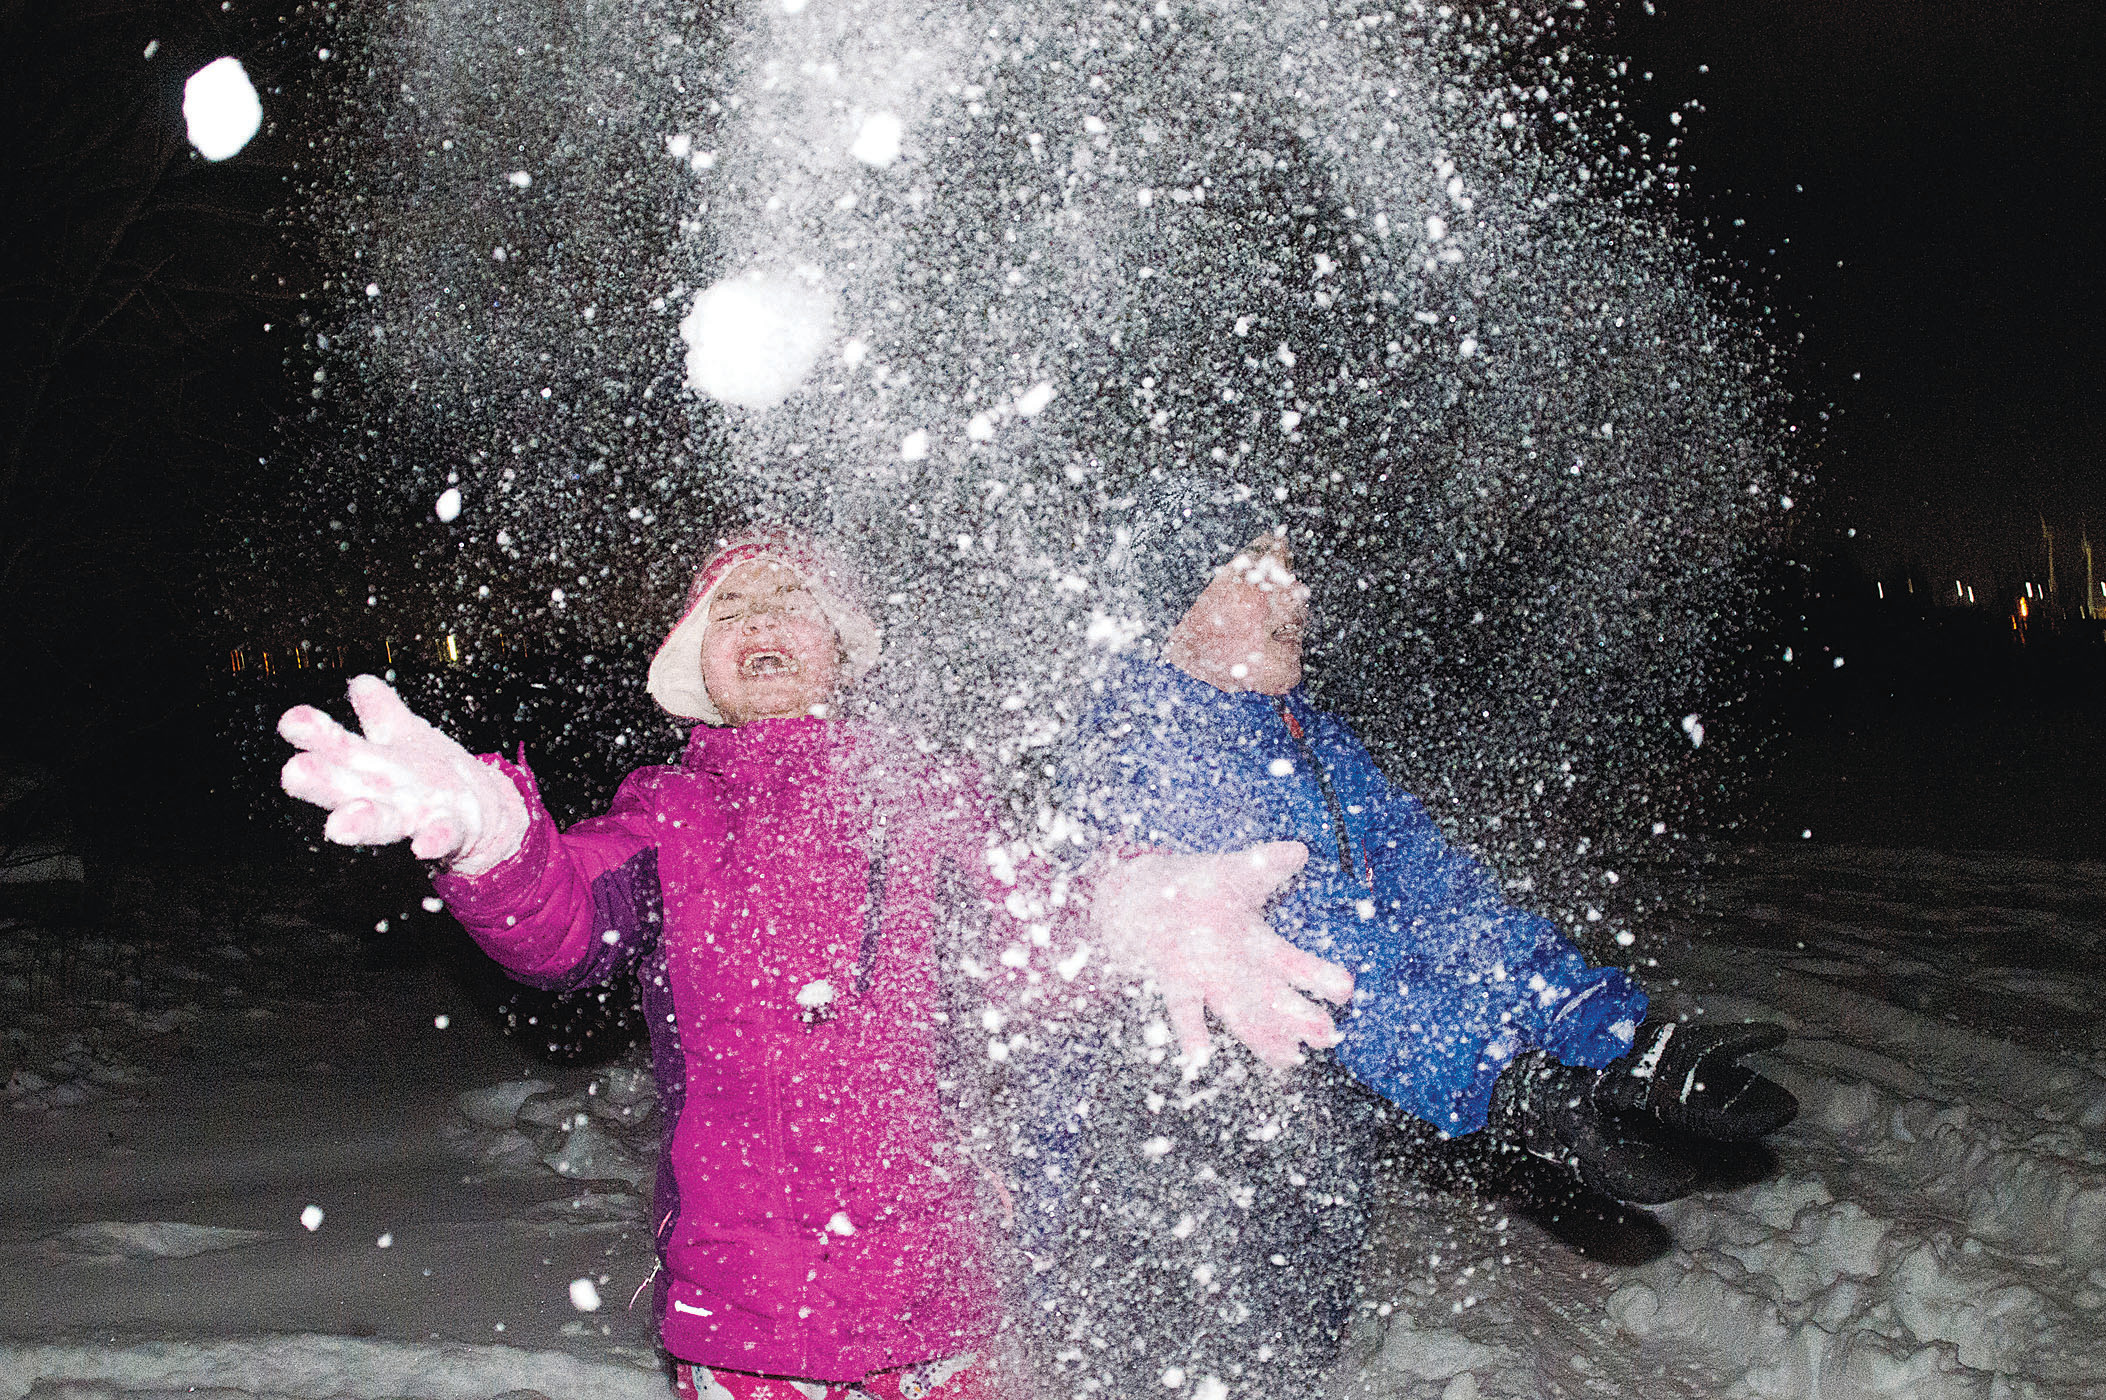 Gessalyn Dias and Jaden McAdam throw snow on the East Bay Bike Path behind the Squantum Club in Riverside after shining lights at Hasbro Children’s Hospital Monday night.